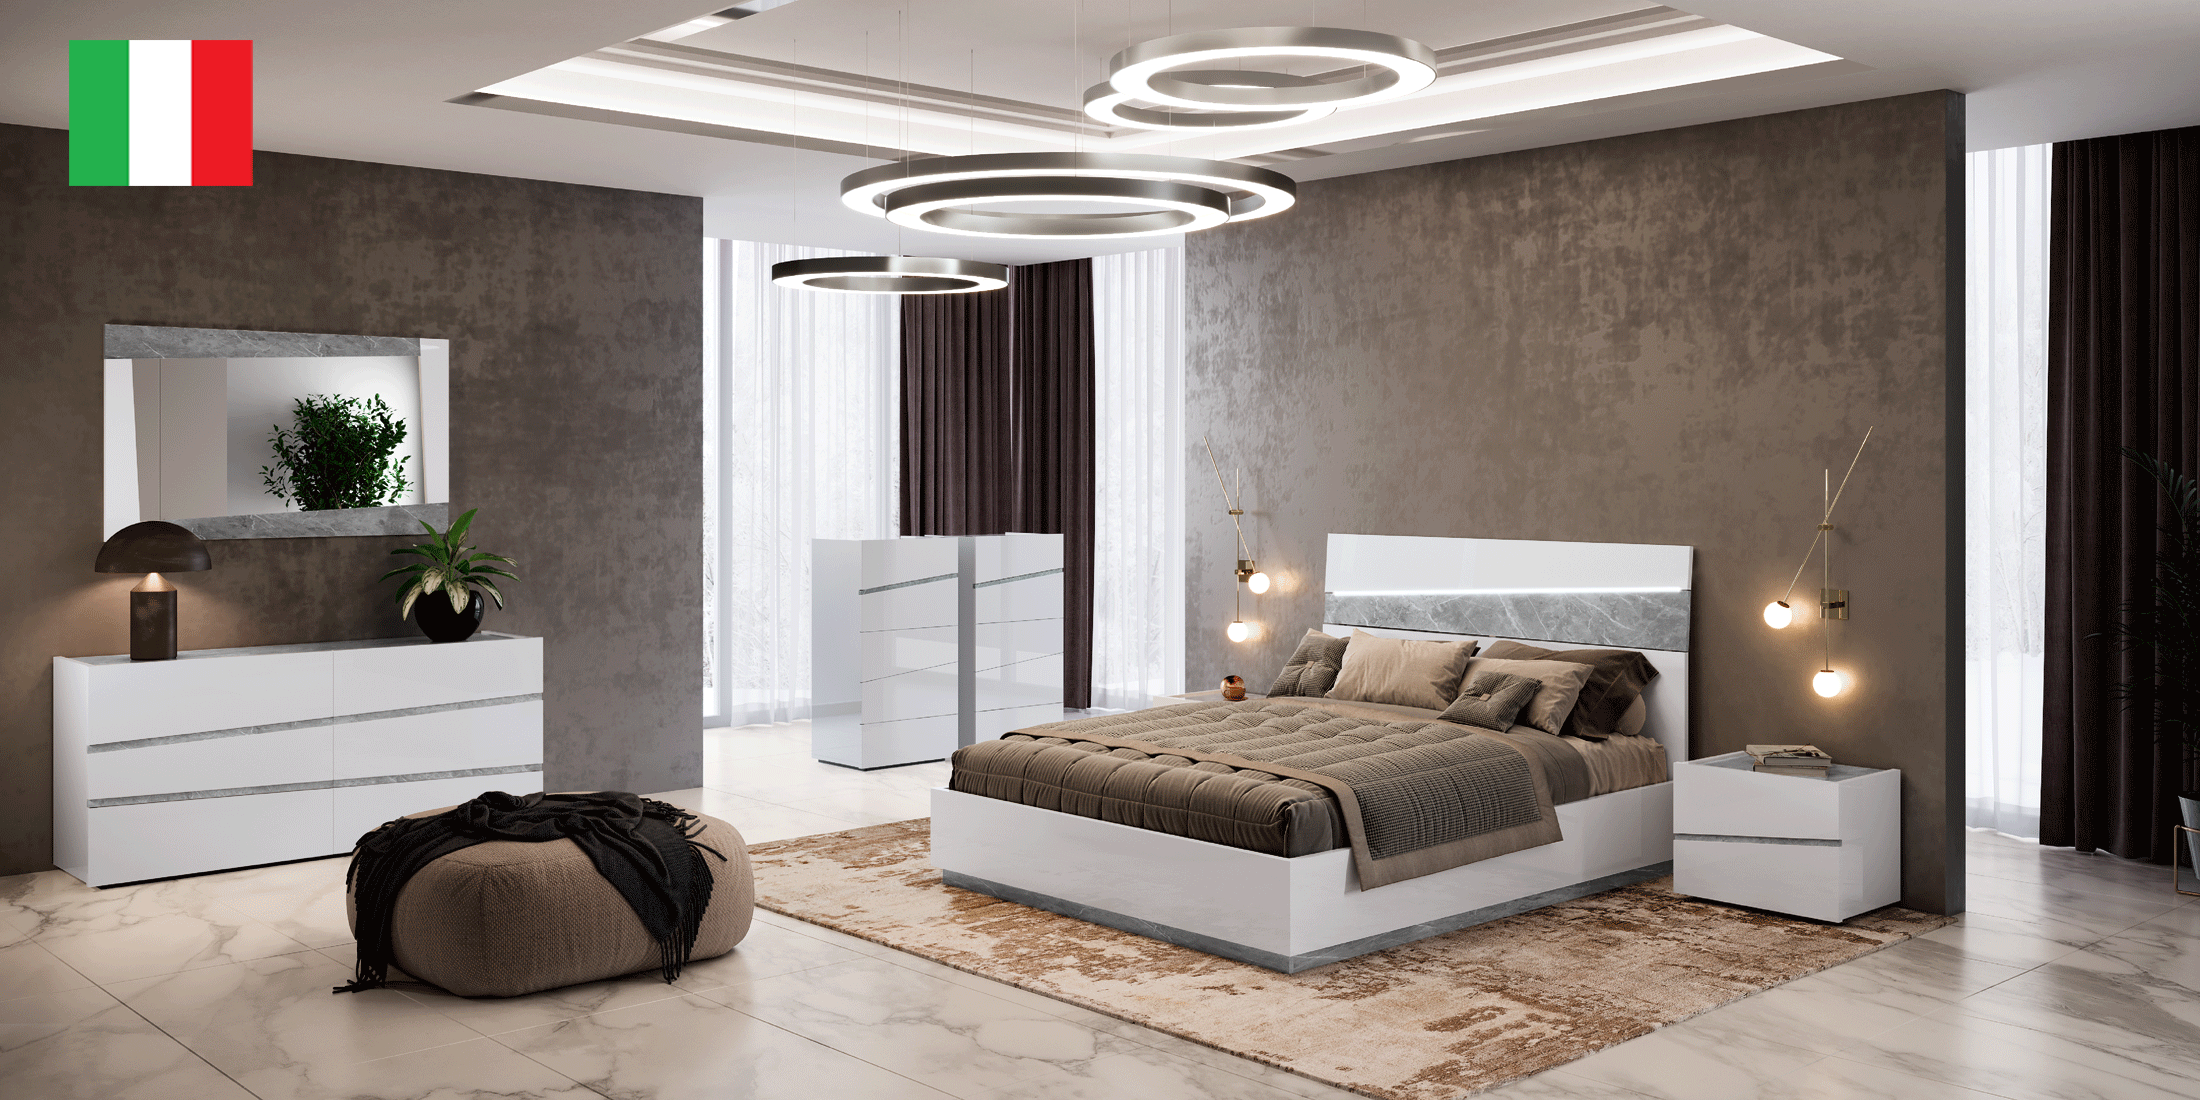 Wallunits Hallway Console tables and Mirrors Alba Bedroom w/ Light by Camelgroup – Italy